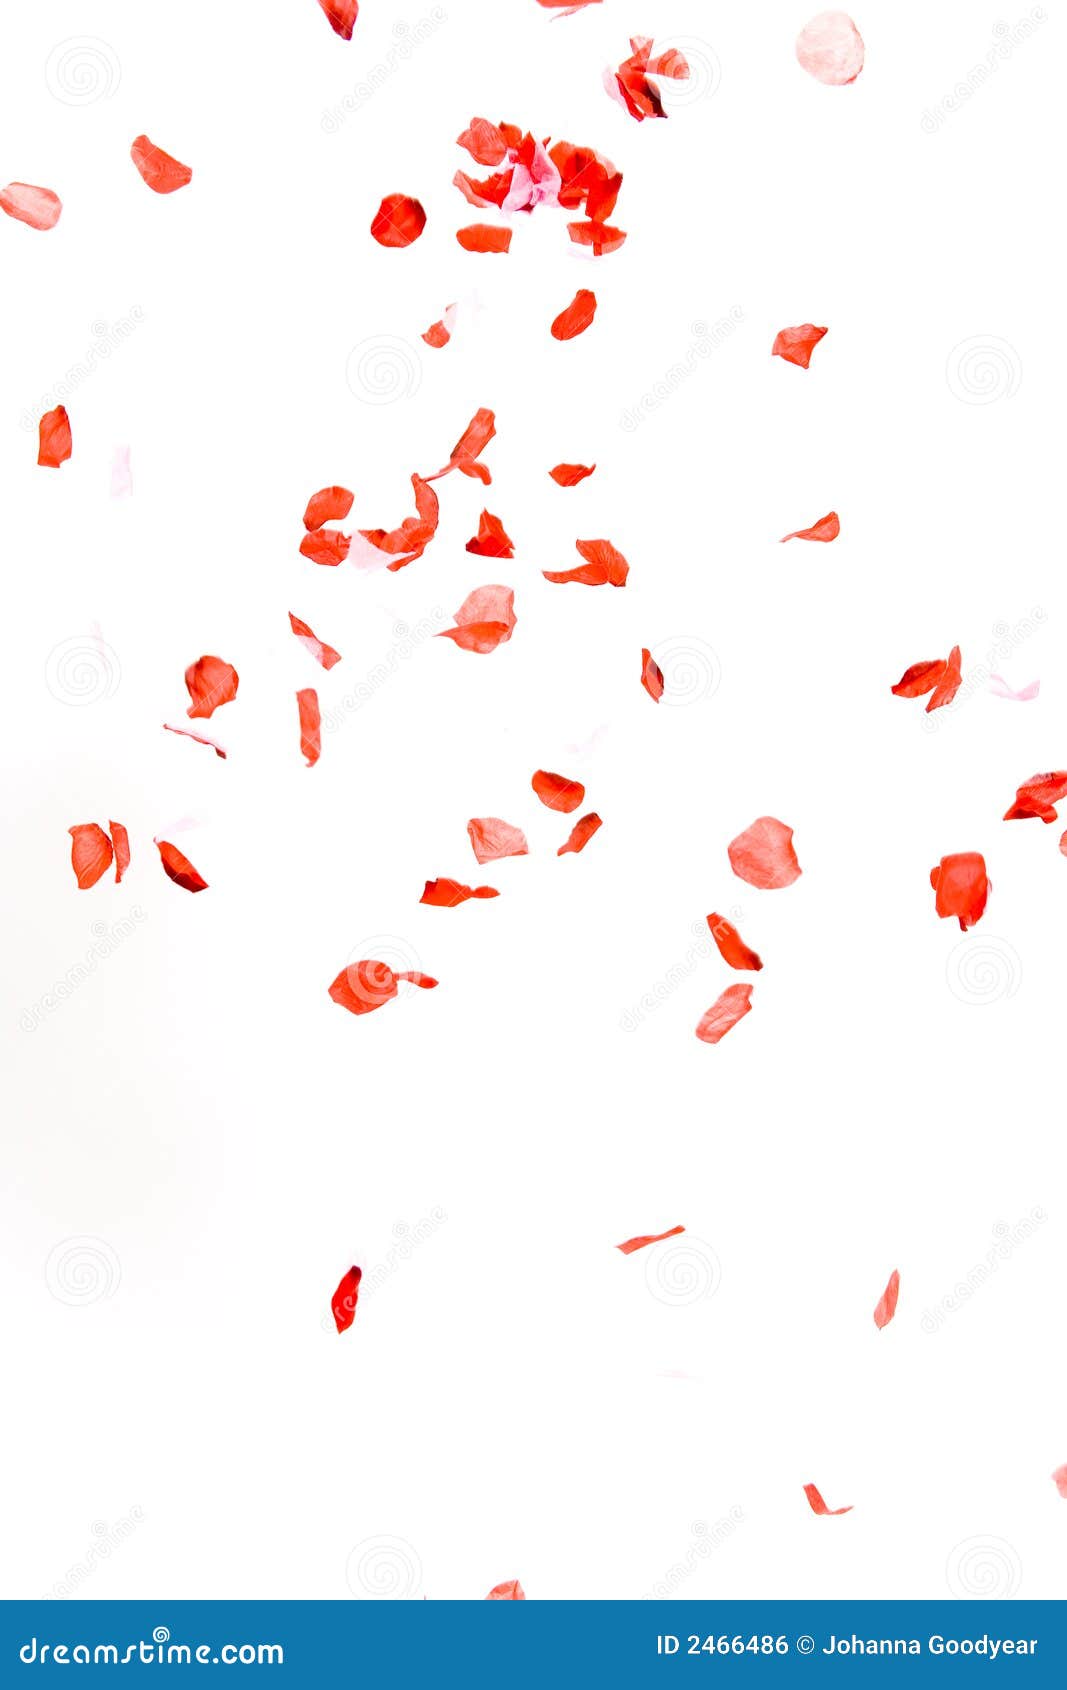 3,025 Falling Rose Petals Stock Photos - Free & Royalty-Free Stock Photos  from Dreamstime